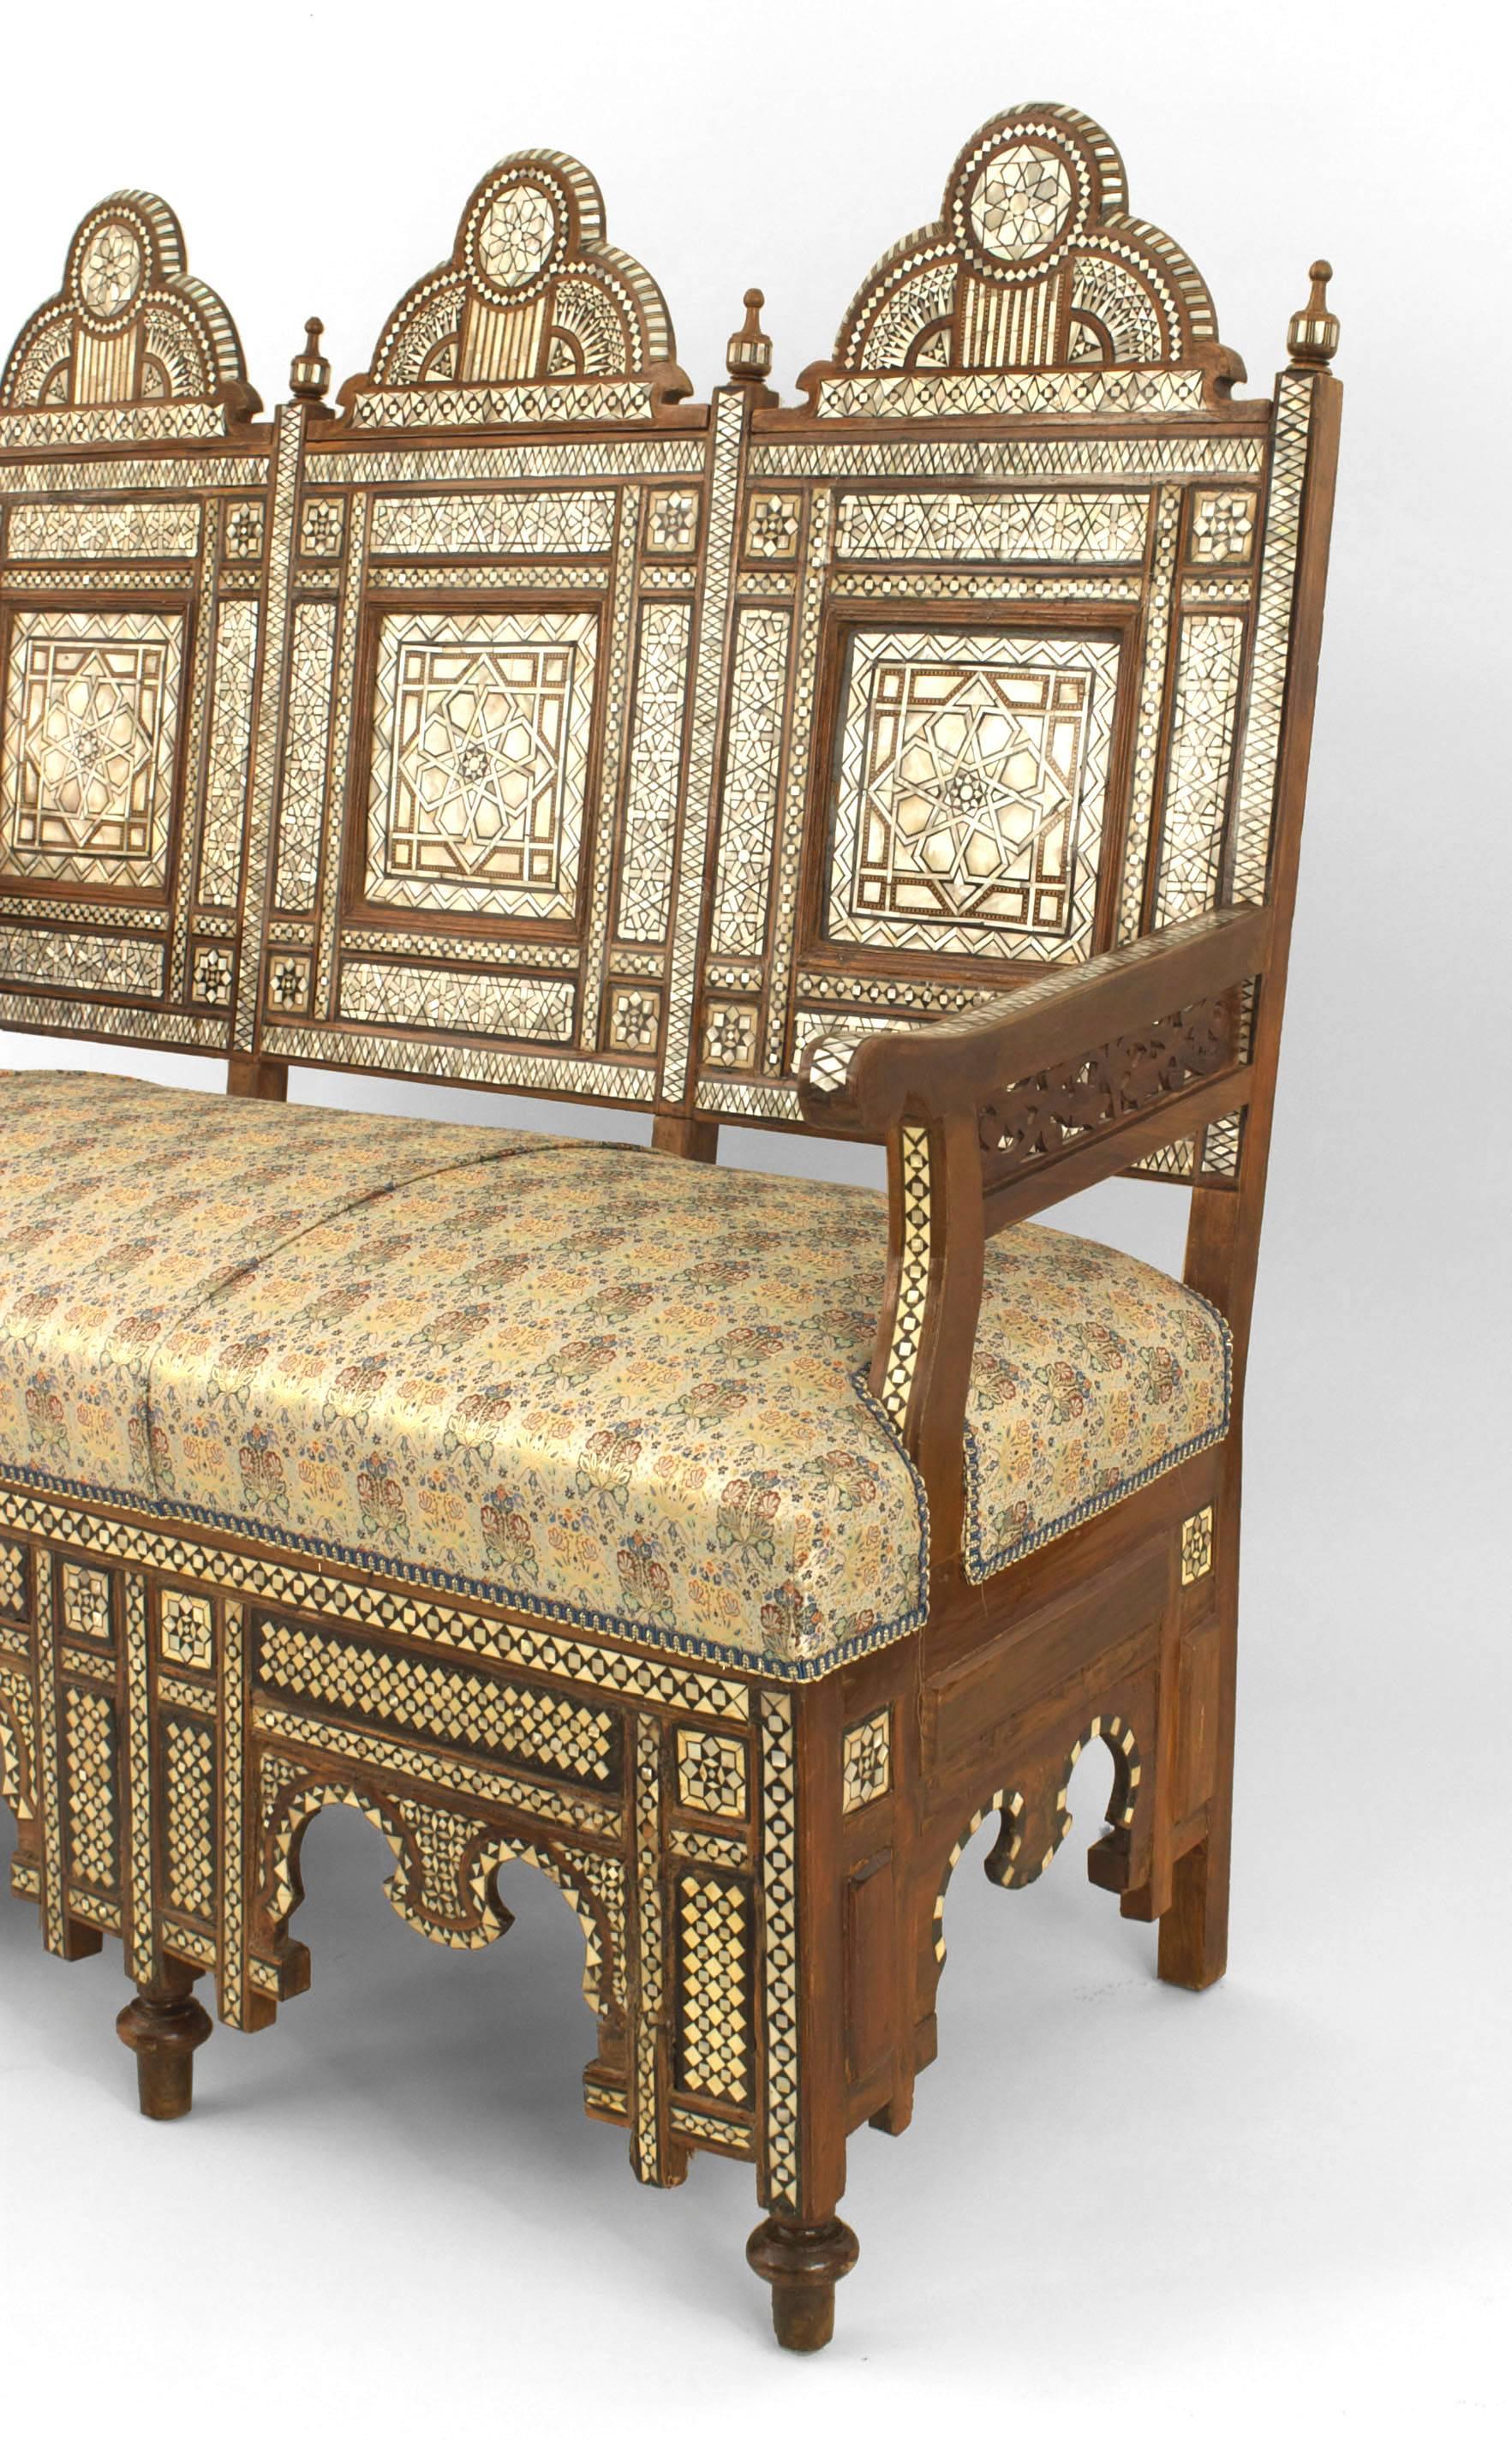 Middle Eastern Syrian (20th Cent) settee in walnut with inlaid mother of pearl and ebony with spindle & ball and finial details (matching 2 arms & 2 sides 060219/CON63)
